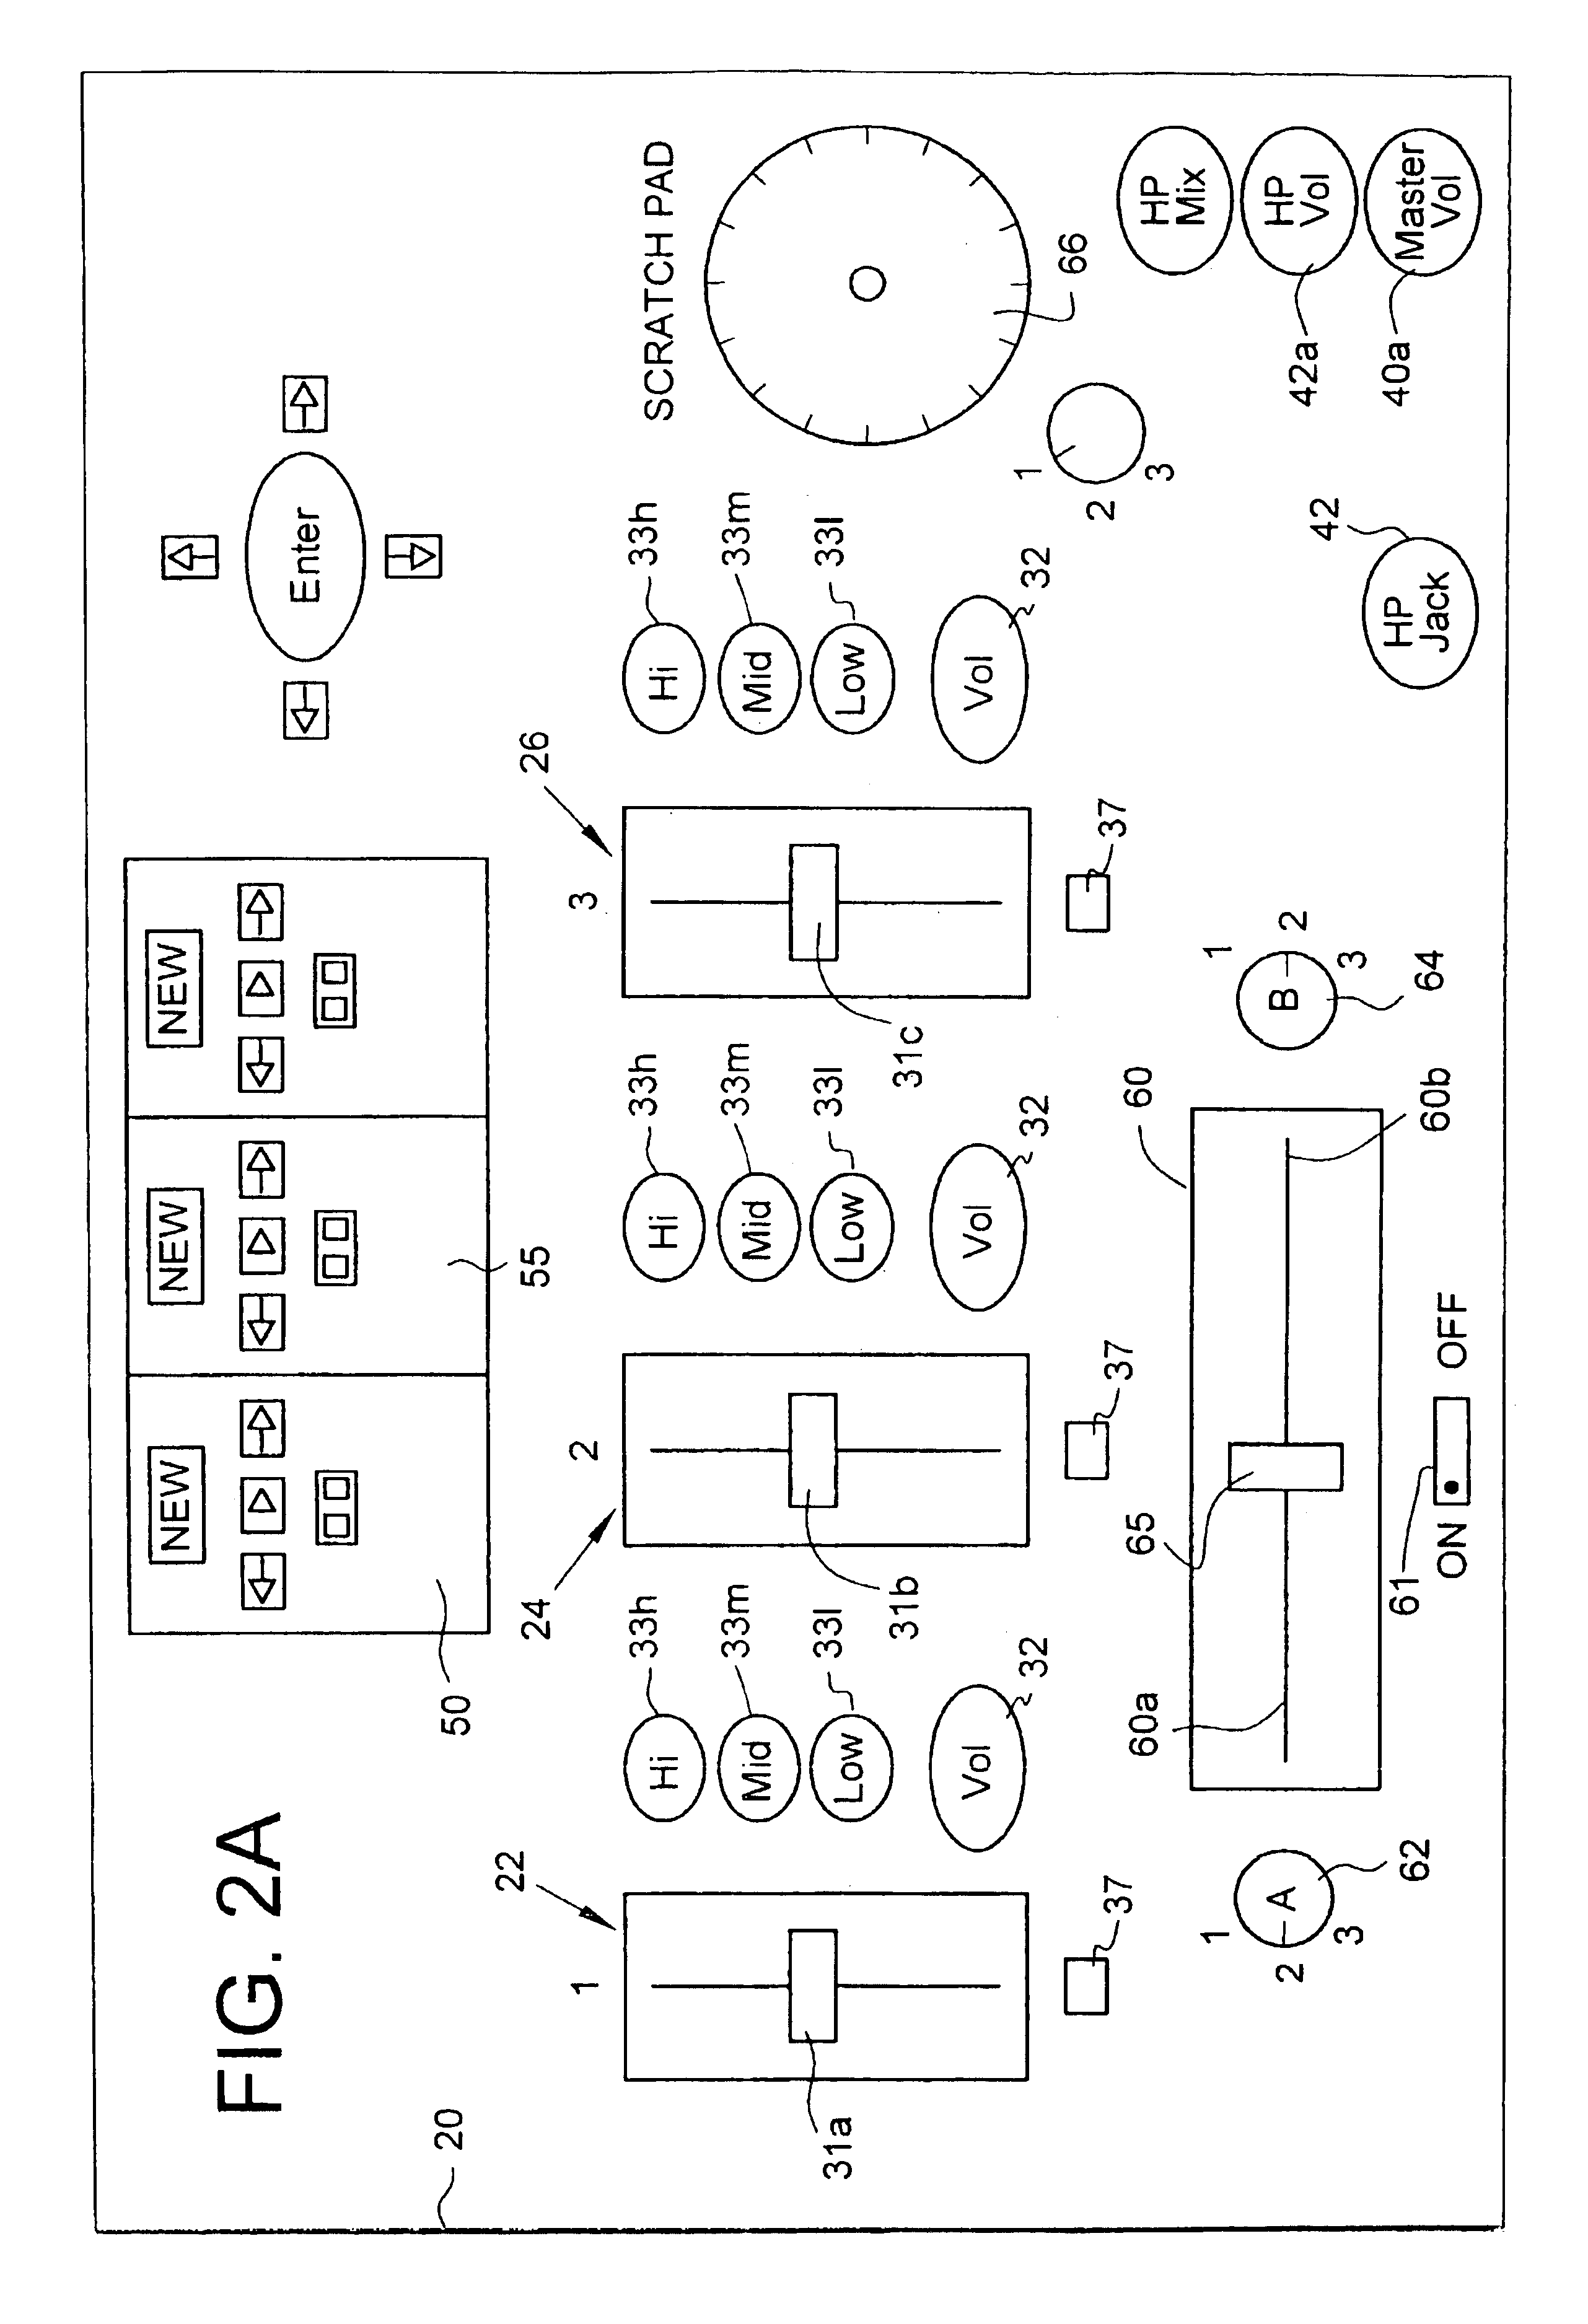 Device using analog controls to mix compressed digital audio data